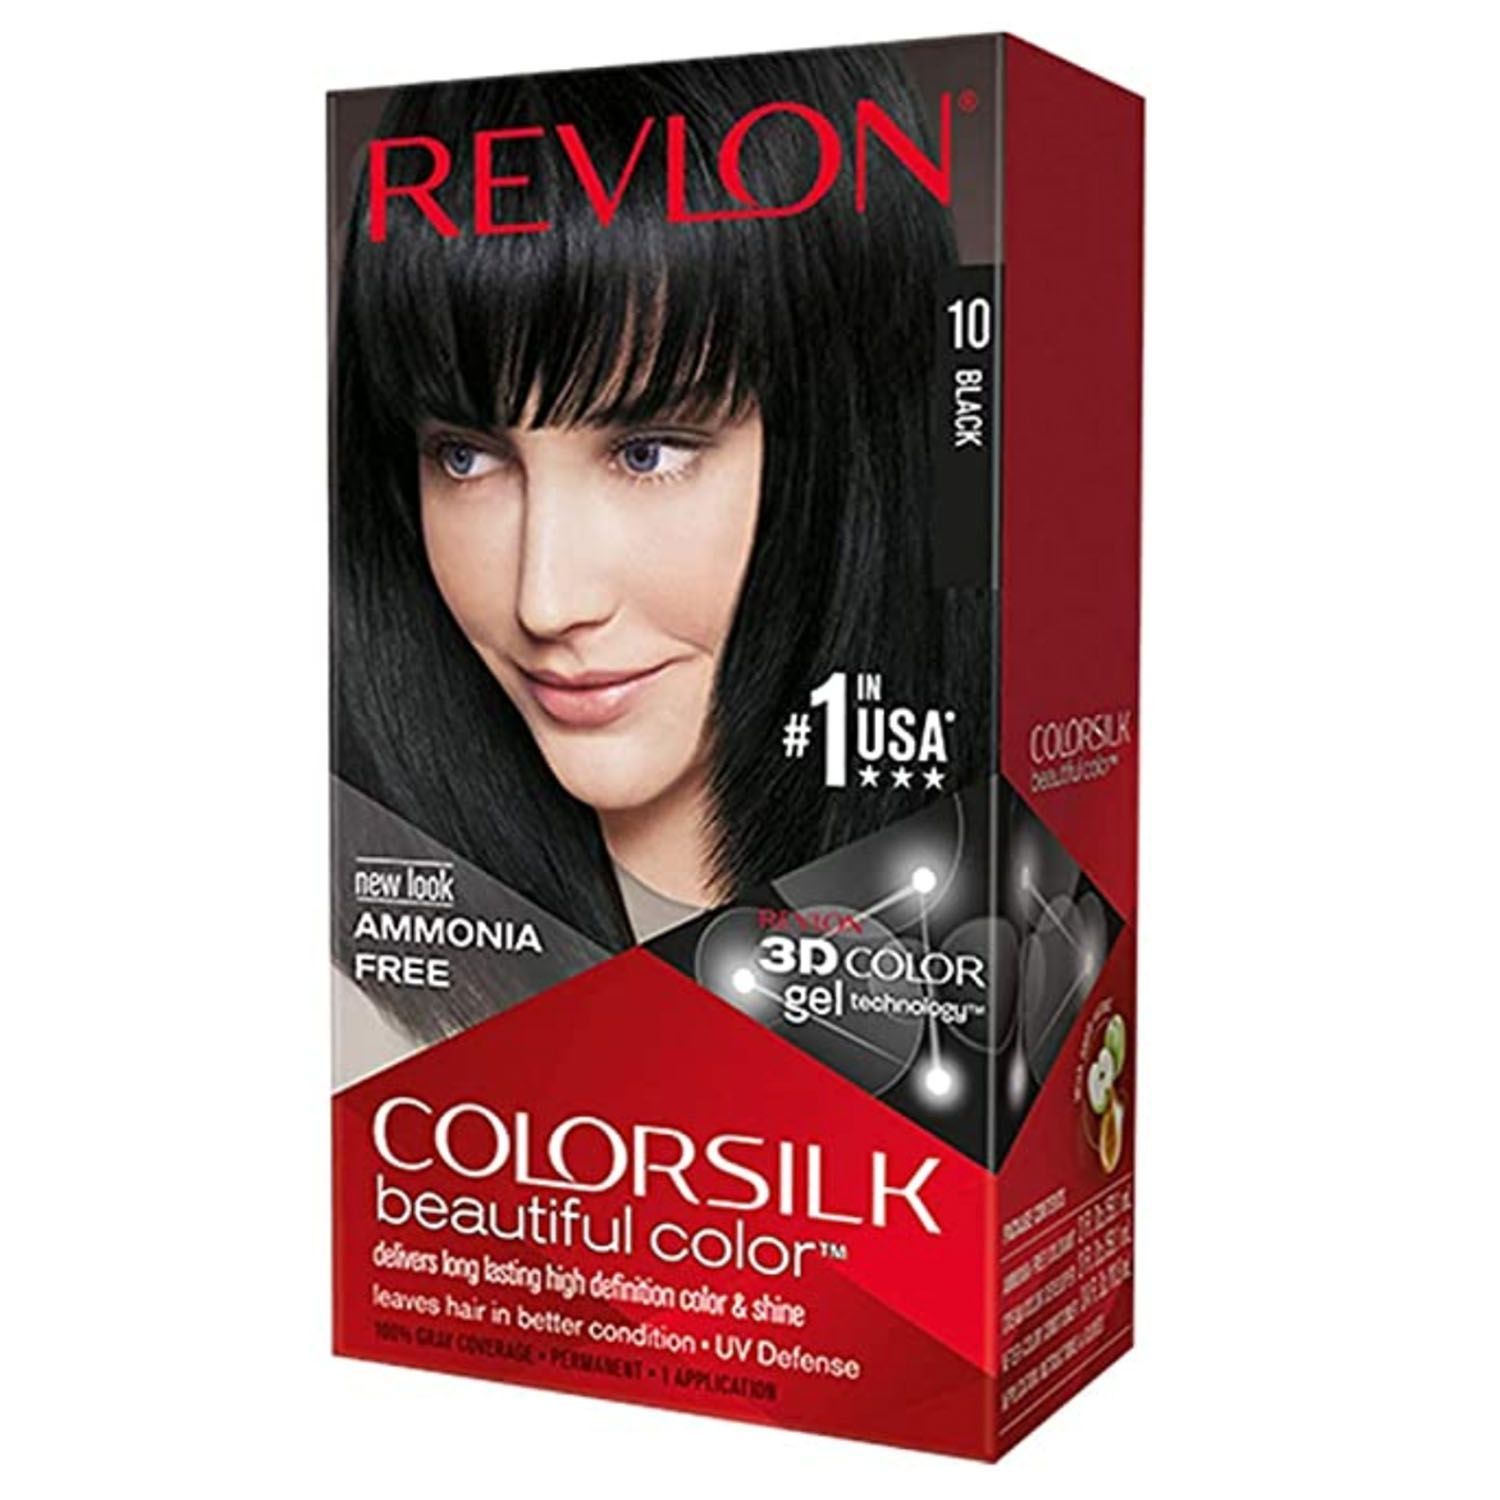 9 Best Drugstore Hair Dyes 2022 - Top At-Home Hair Dyes